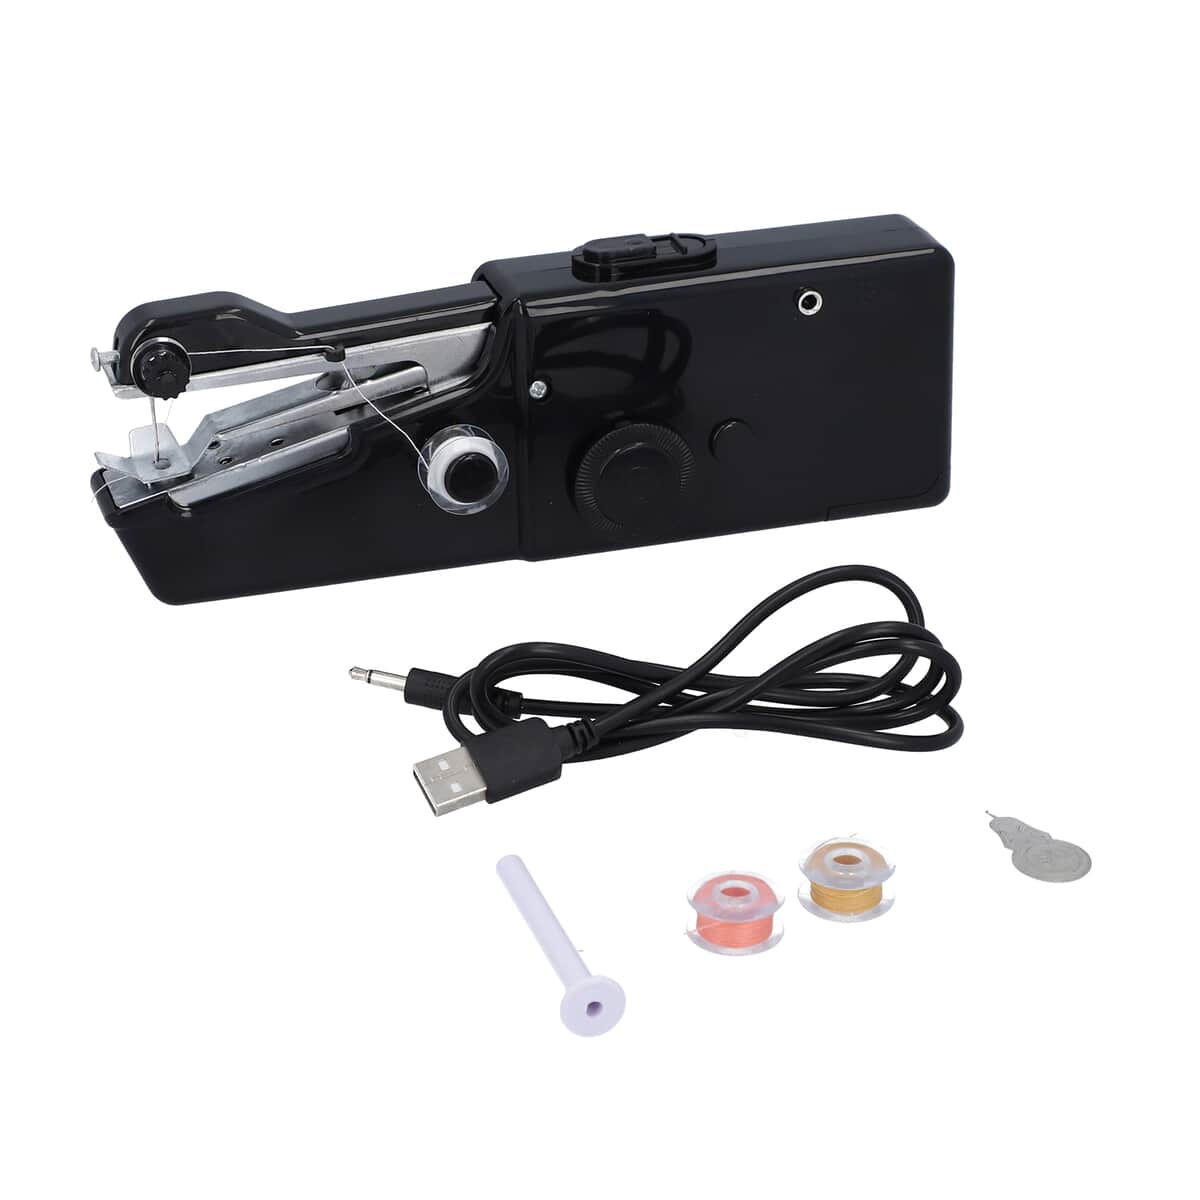 Black Handy Stitch Handheld Sewing Machine (4x1.5V Battery Not included) image number 0